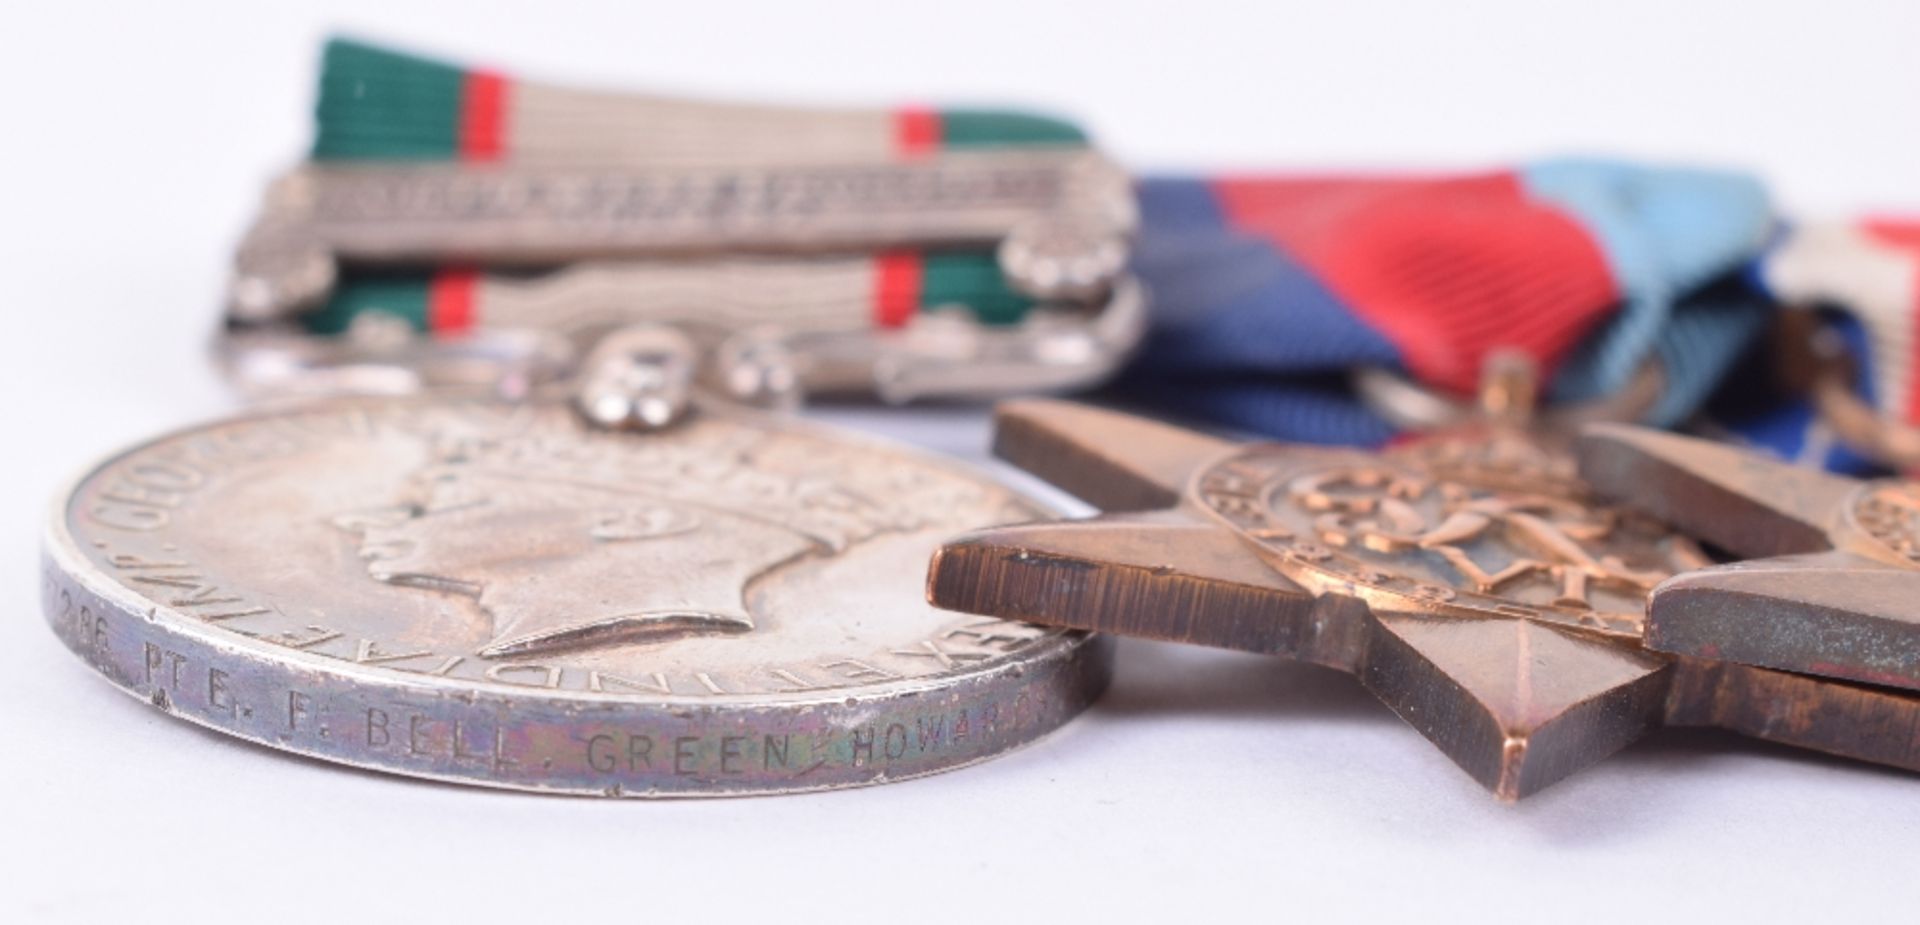 North West Frontier and WW2 Campaign Medal Group of Six to the Green Howards - Image 3 of 3